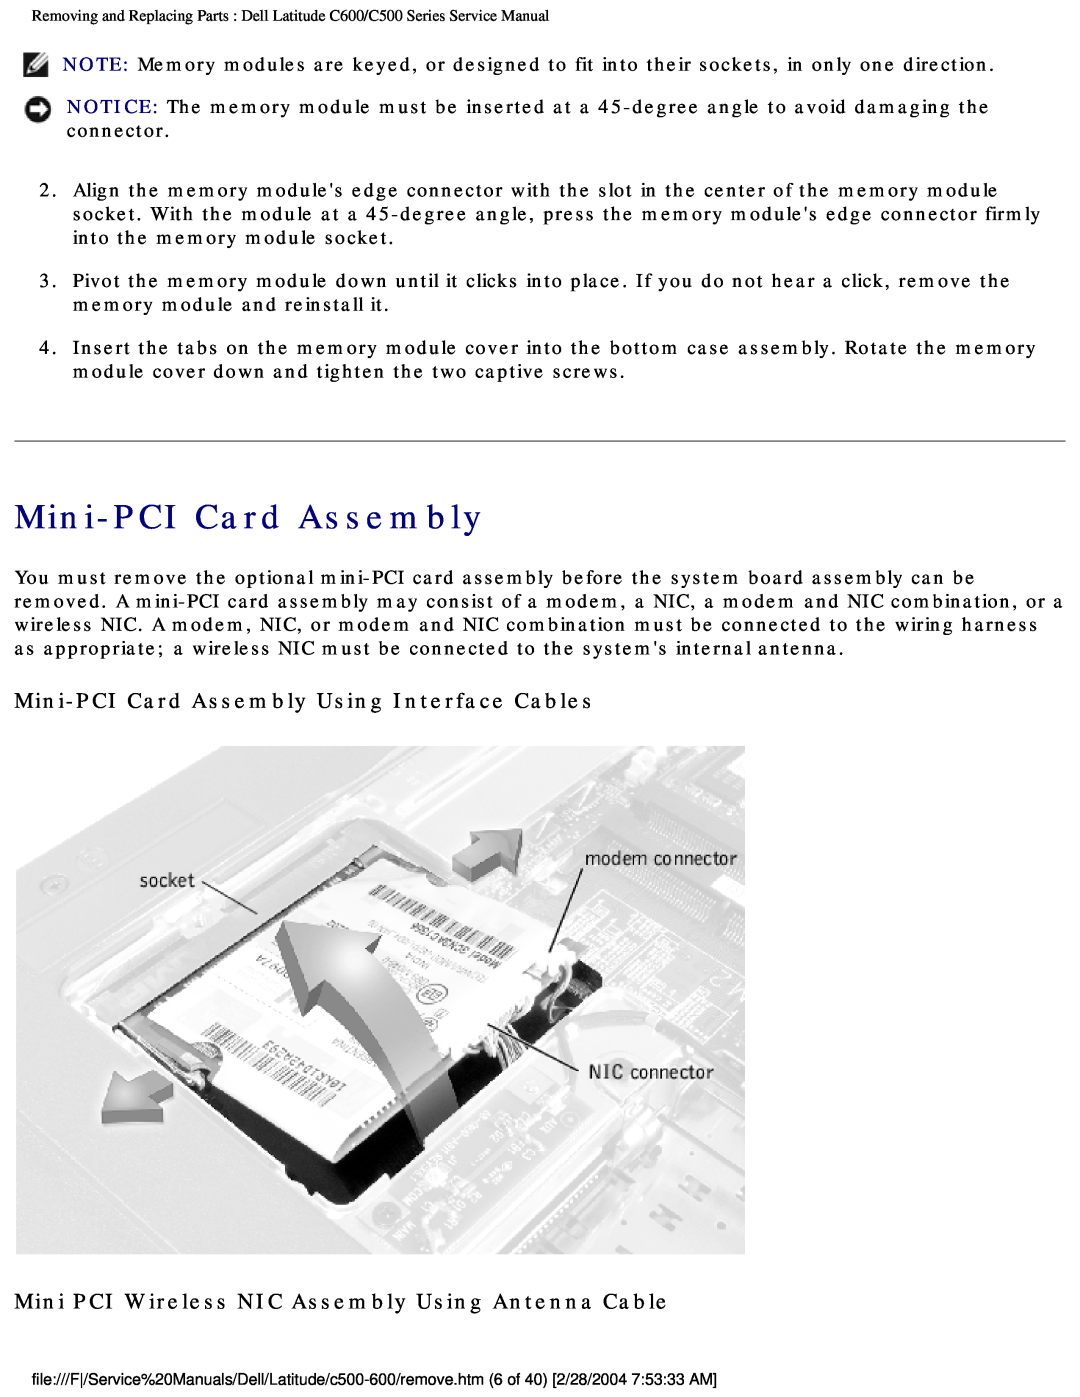 Dell C500 manual Mini-PCI Card Assembly Using Interface Cables, Mini PCI Wireless NIC Assembly Using Antenna Cable 